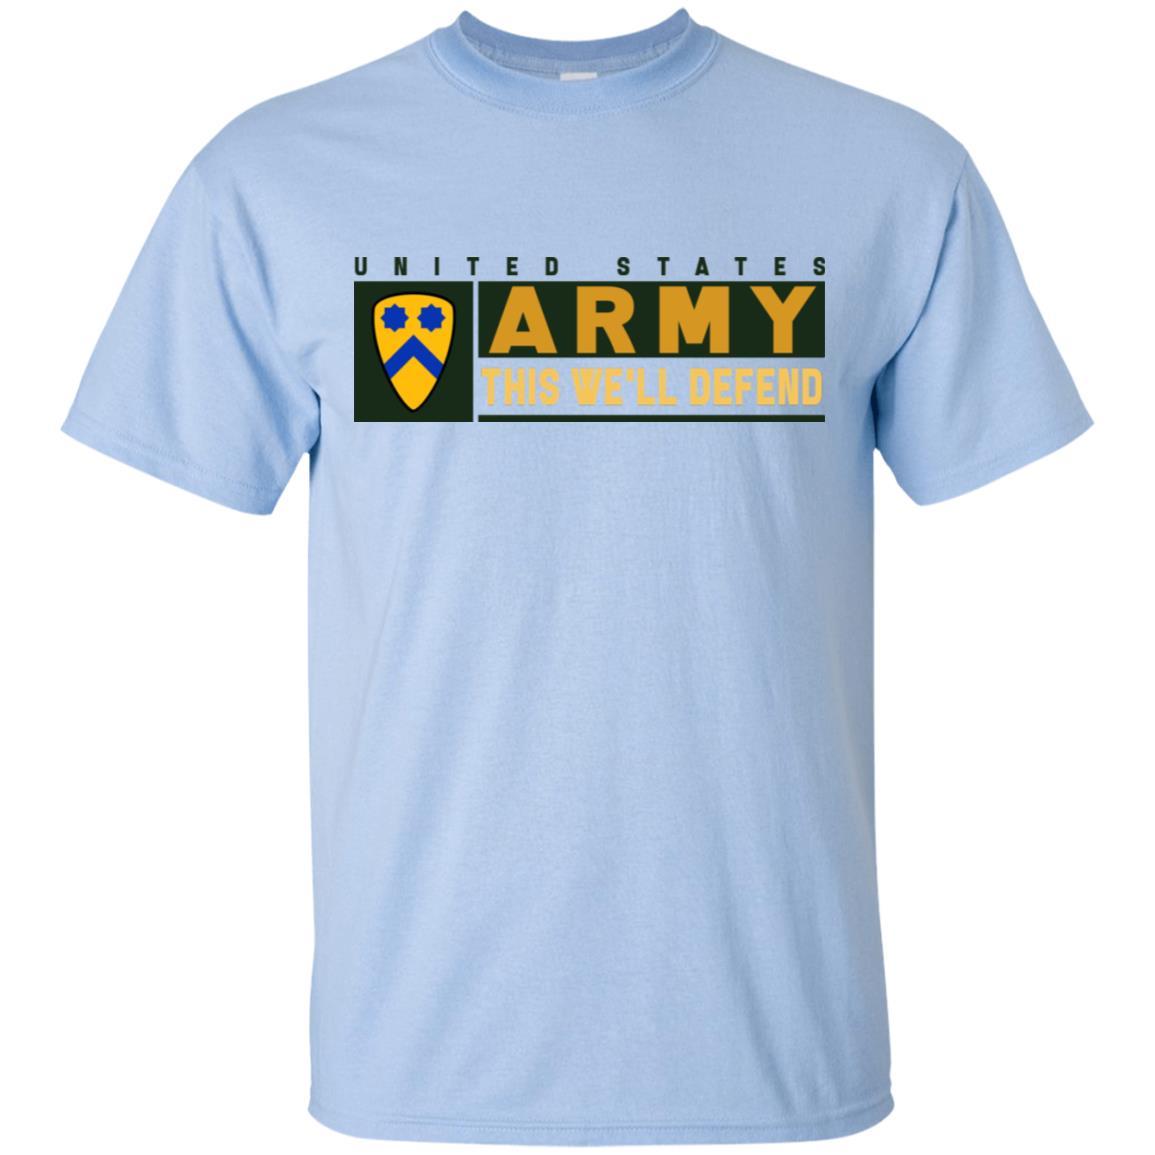 US Army 2nd Cavalry Division- This We'll Defend T-Shirt On Front For Men-TShirt-Army-Veterans Nation